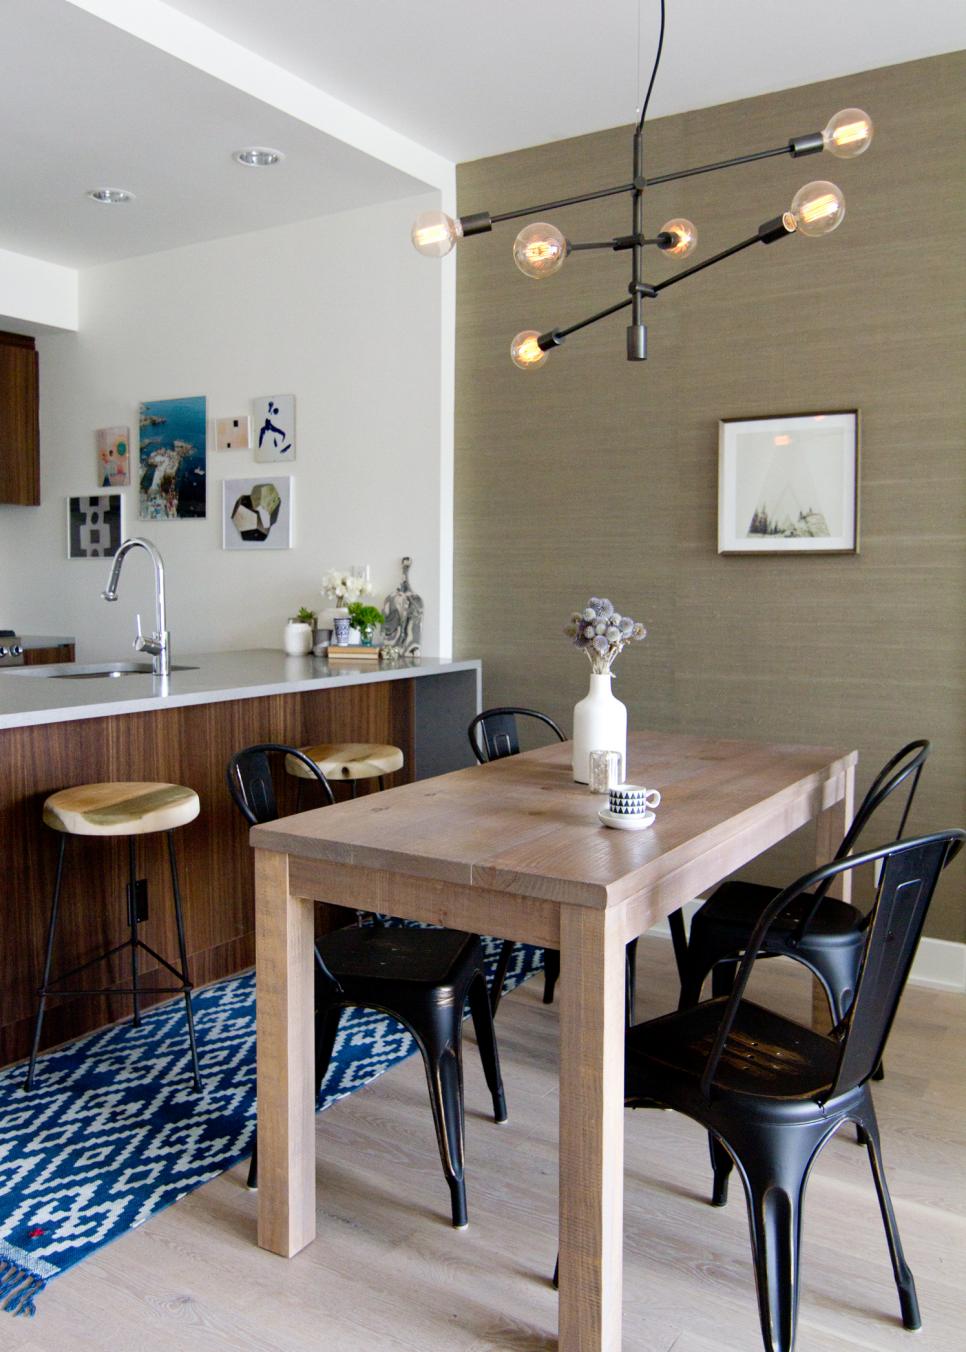 Best Small Modern Dining Room Decorating Ideas with Epic Design ideas